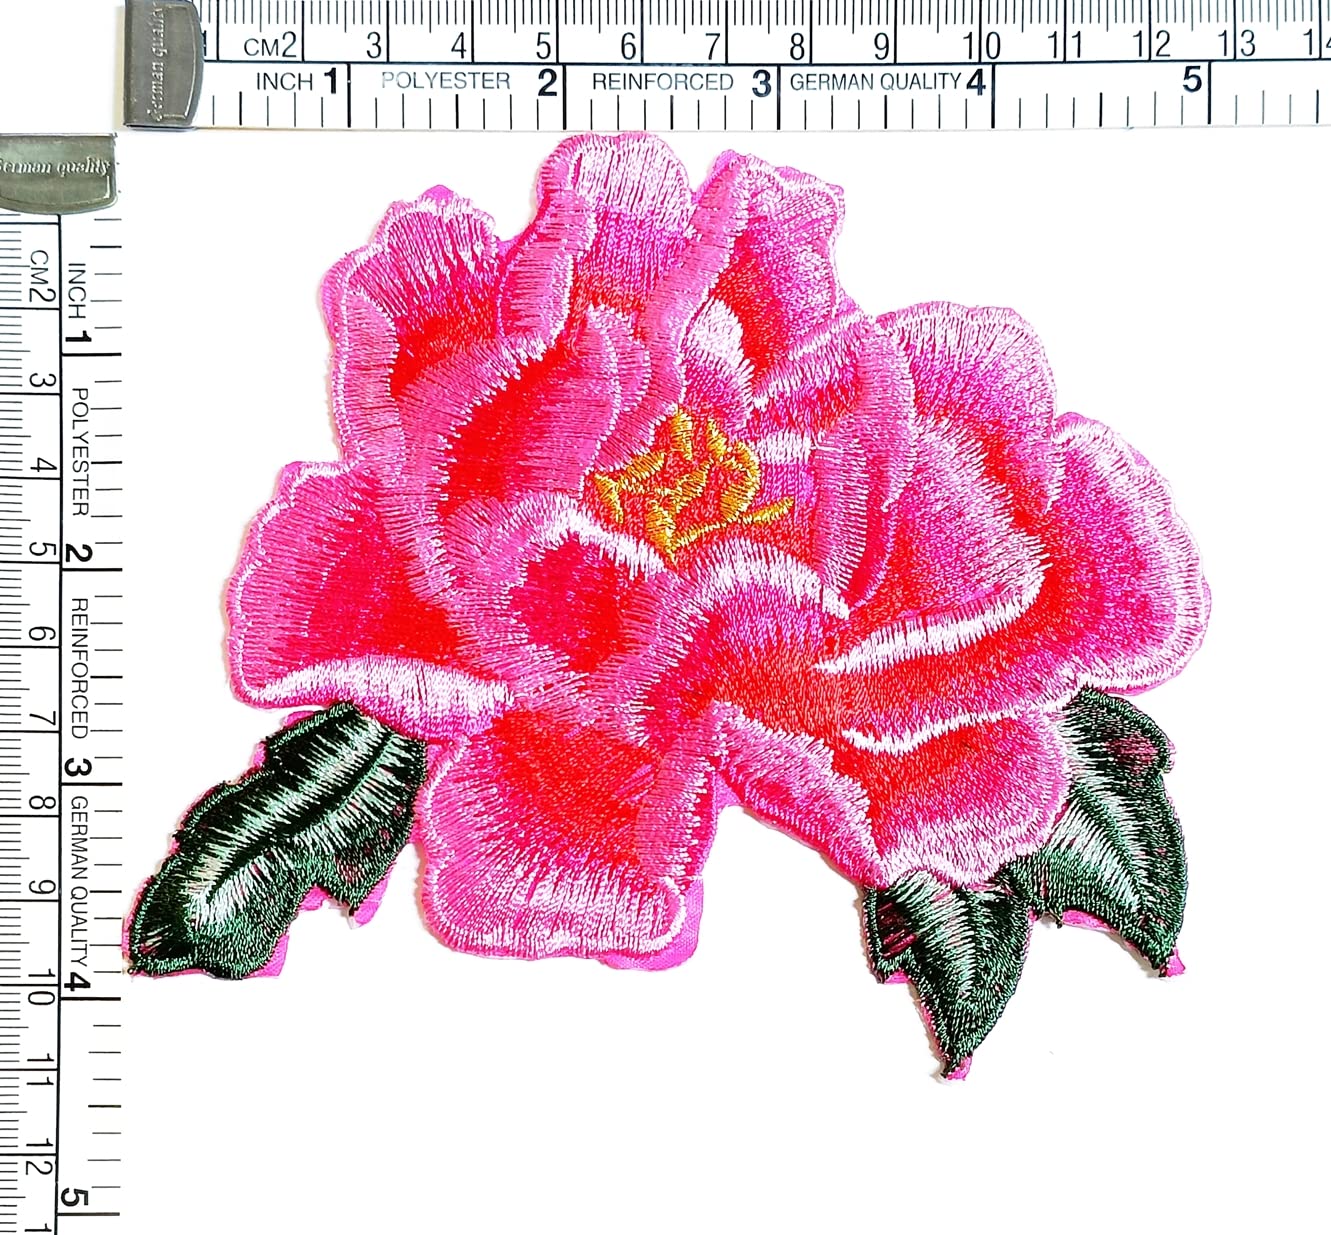 Kleenplus Pink Rose Patch Flowers Love Embroidered Badge Iron On Sew On Emblem for Jackets Shirts Clothes Sticker Arts Decorative Repair